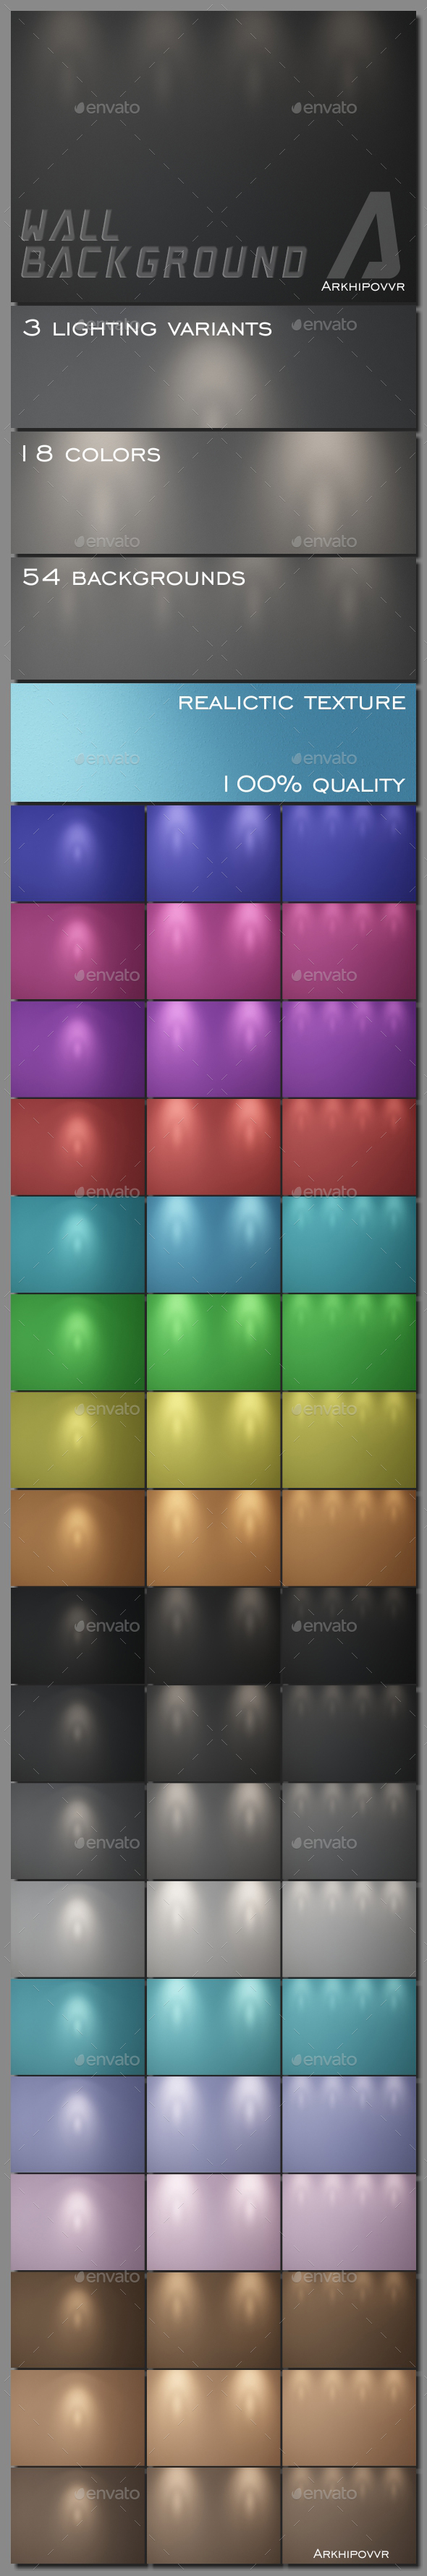 GraphicRiver Wall Backgrounds 20751380